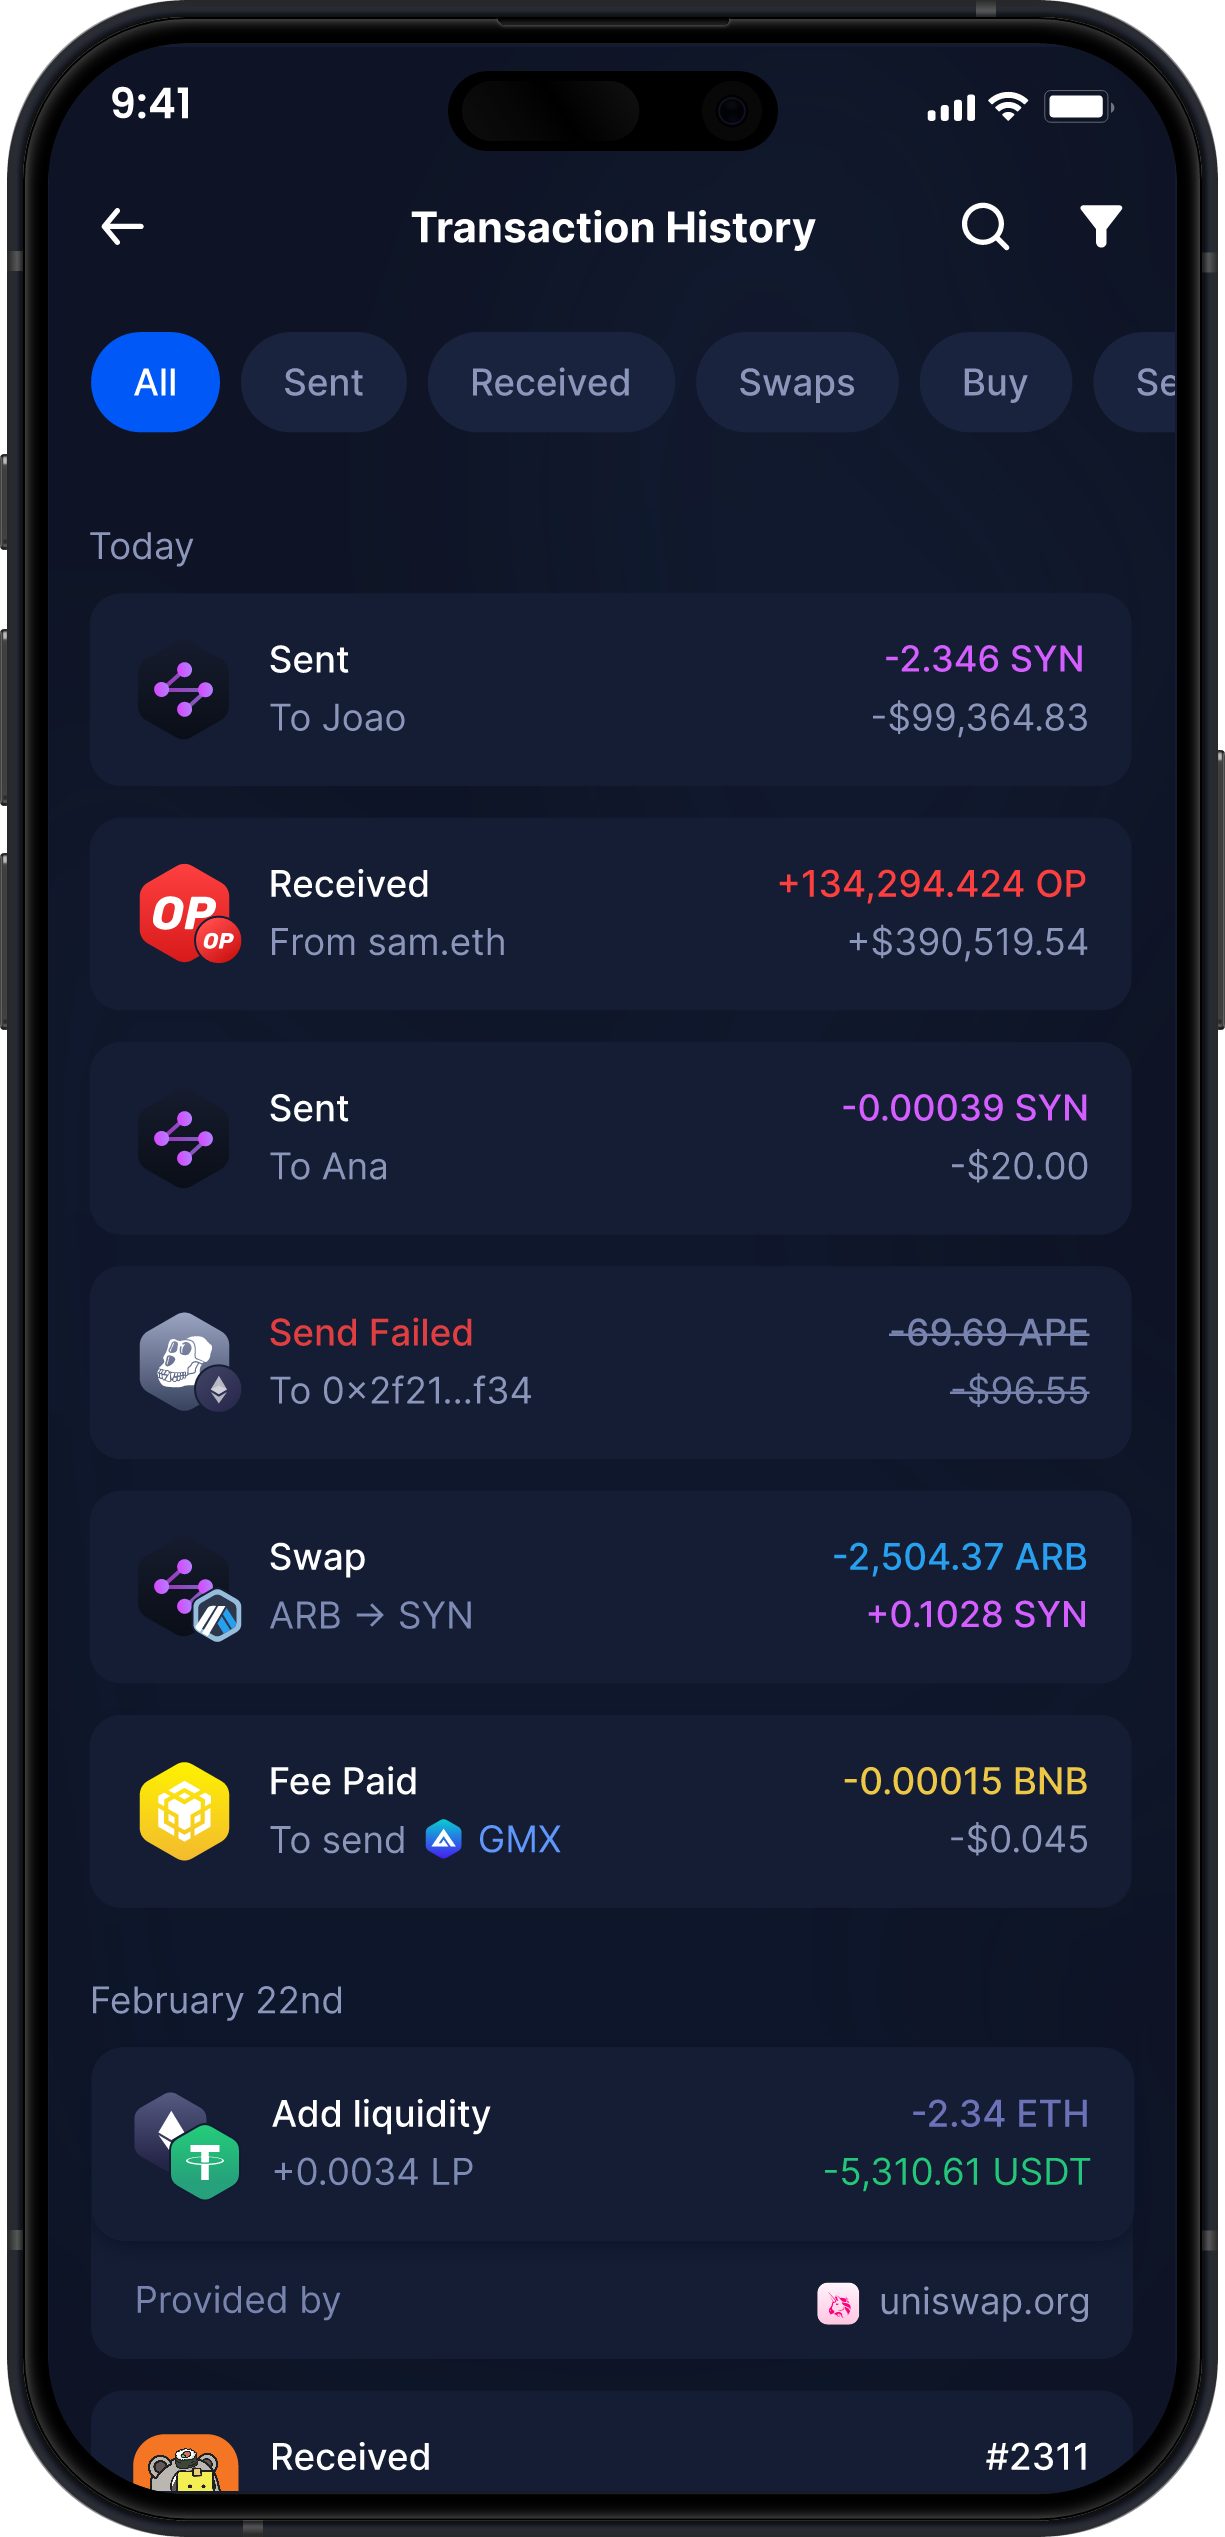 Infinity Mobile Synapse Wallet - Complete SYN Transaction History